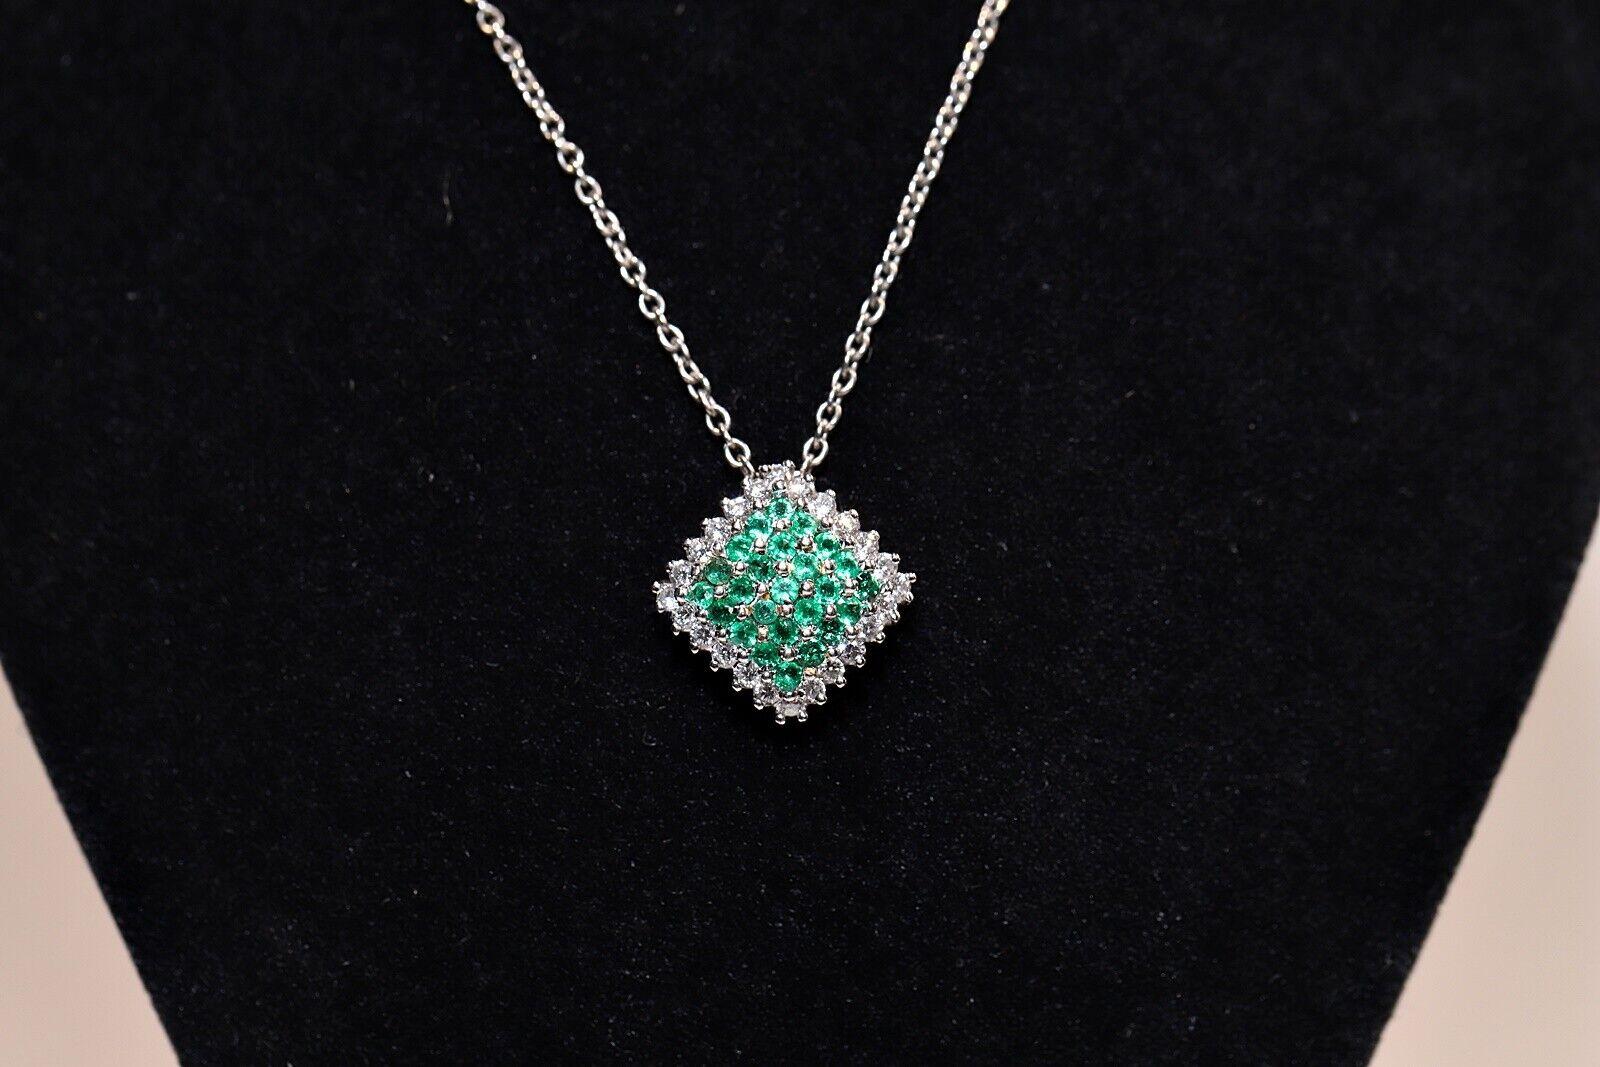 In very good condition.
Total weight is 5.3 grams.
Dimention is diamond totally 0.40 carat.
The diamond is has G color and vvs-vs.
Totally  is emerald 0.60 carat.
Totally lenght is chain 43 cm.
Please contact  for any questions.